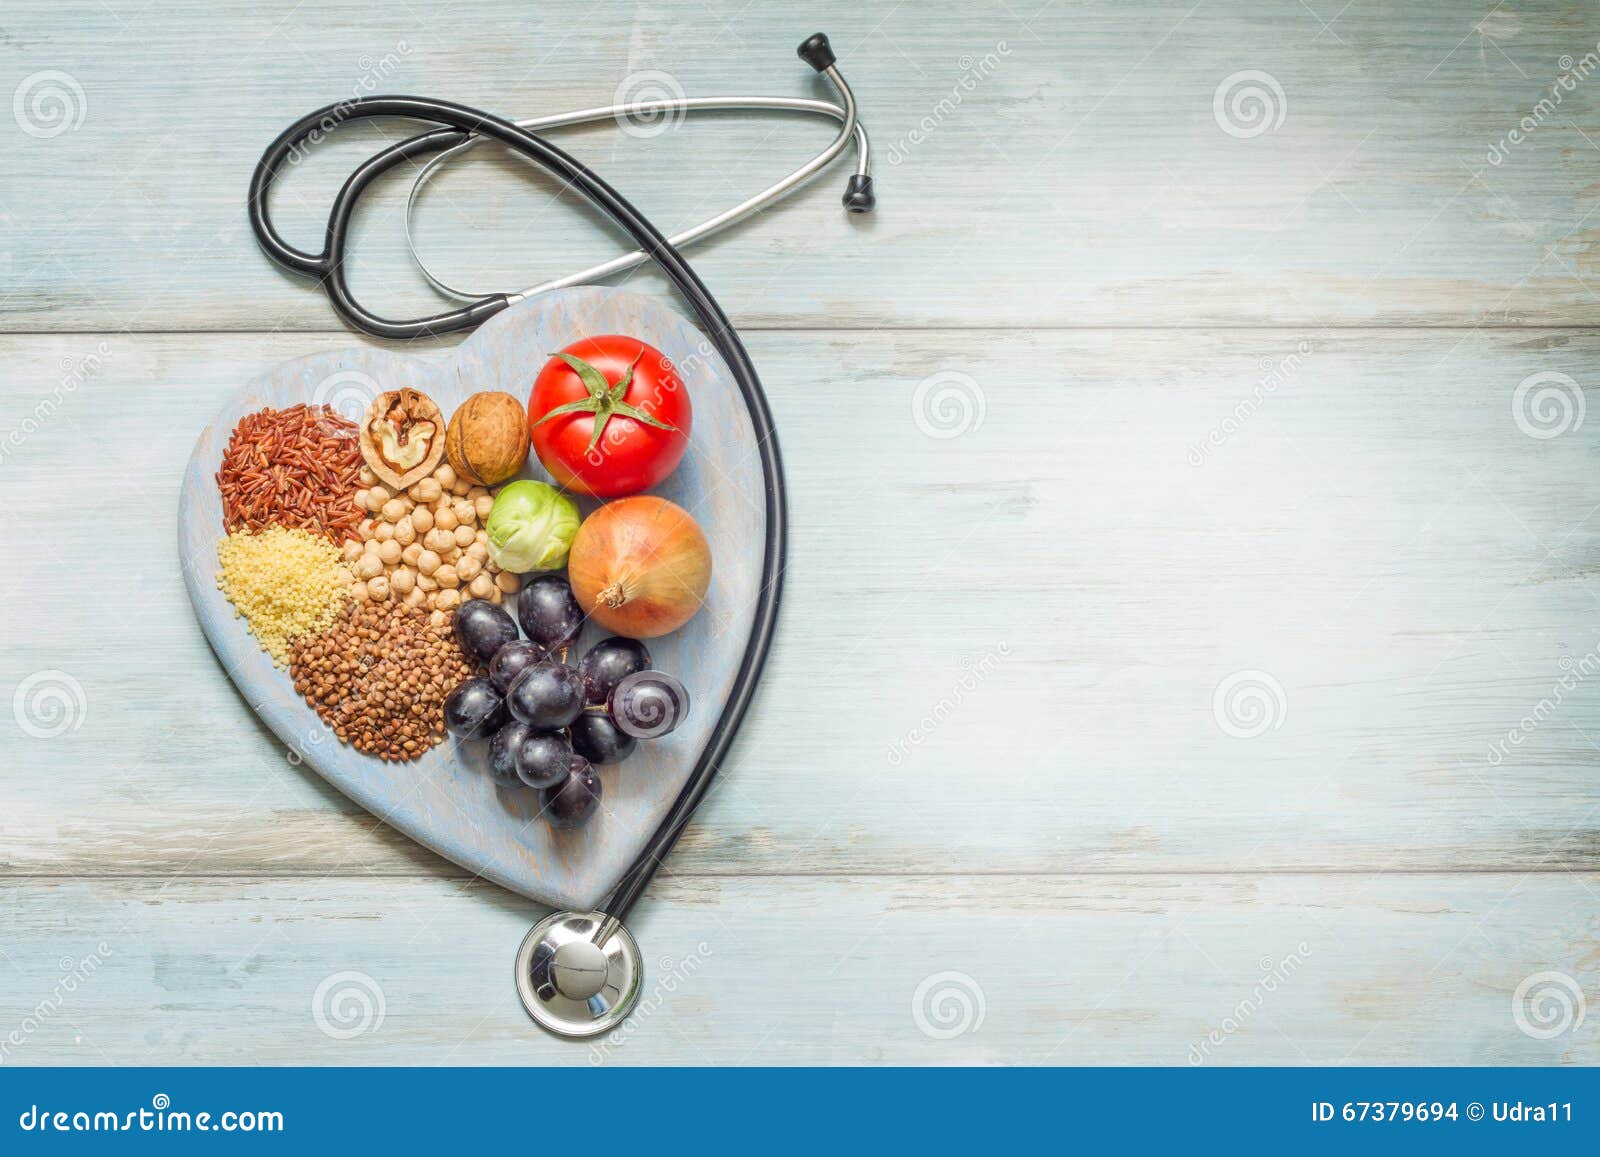 healthy lifestyle and healthcare concept with food, heart and stethoscope